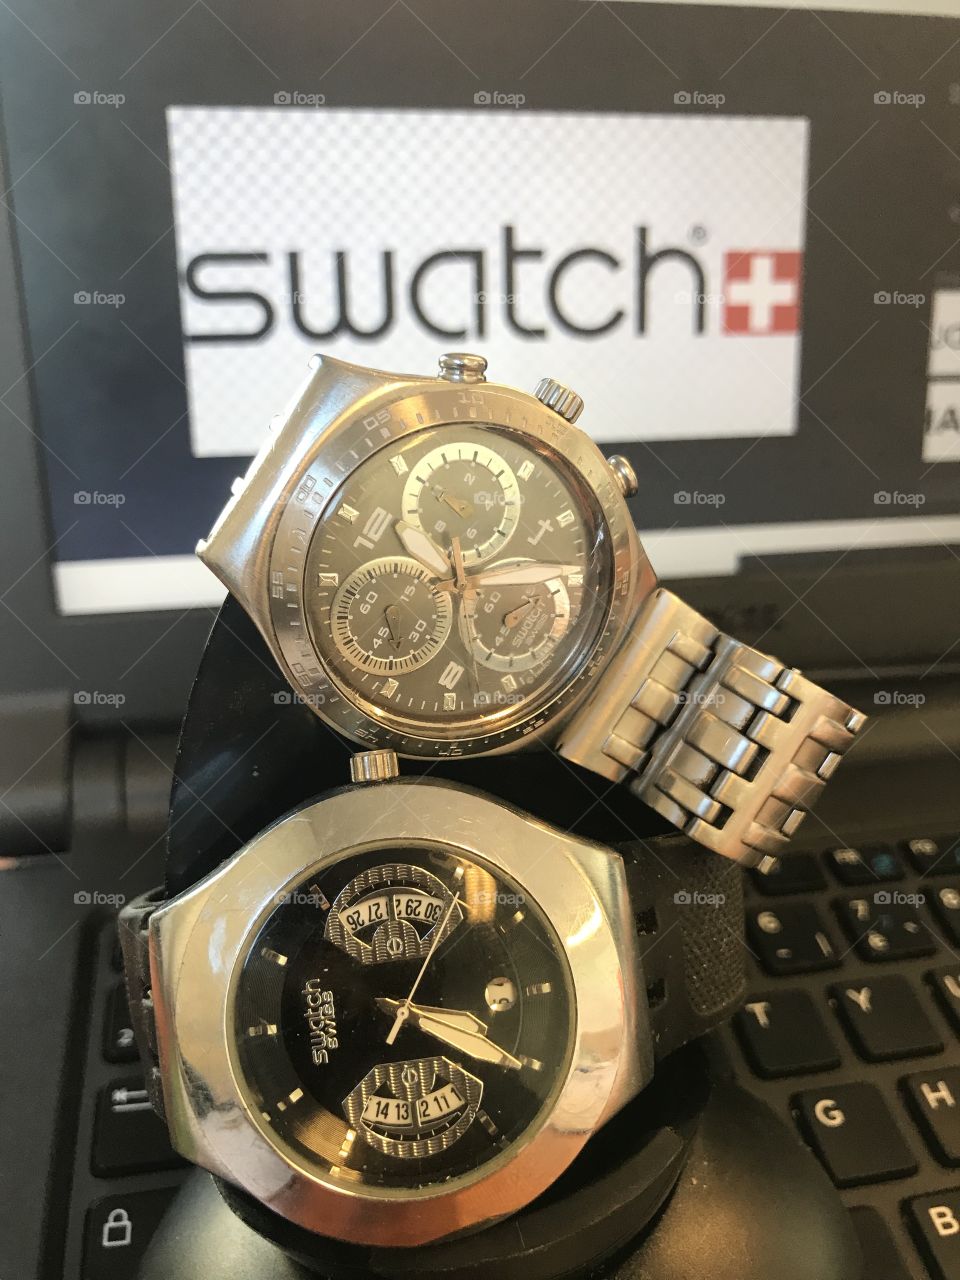 I just love my swatch watches !